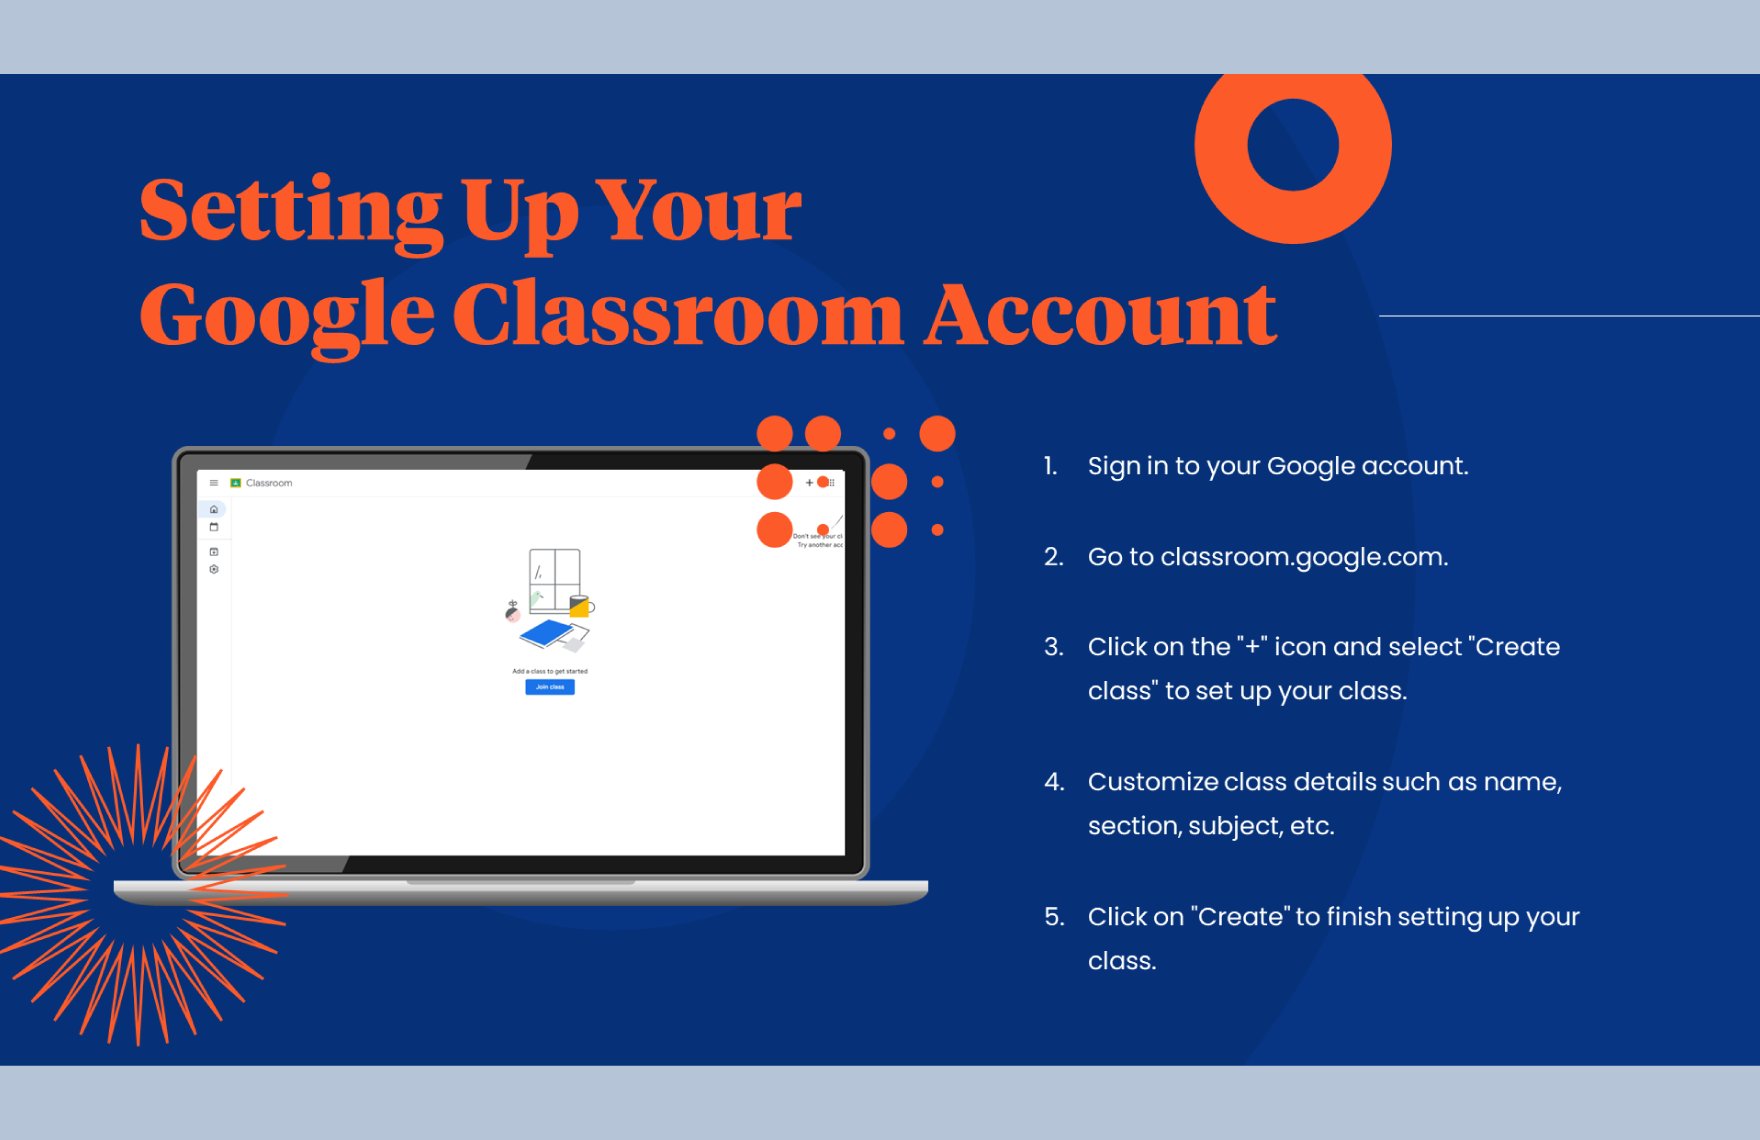 Google Classroom for Students Template